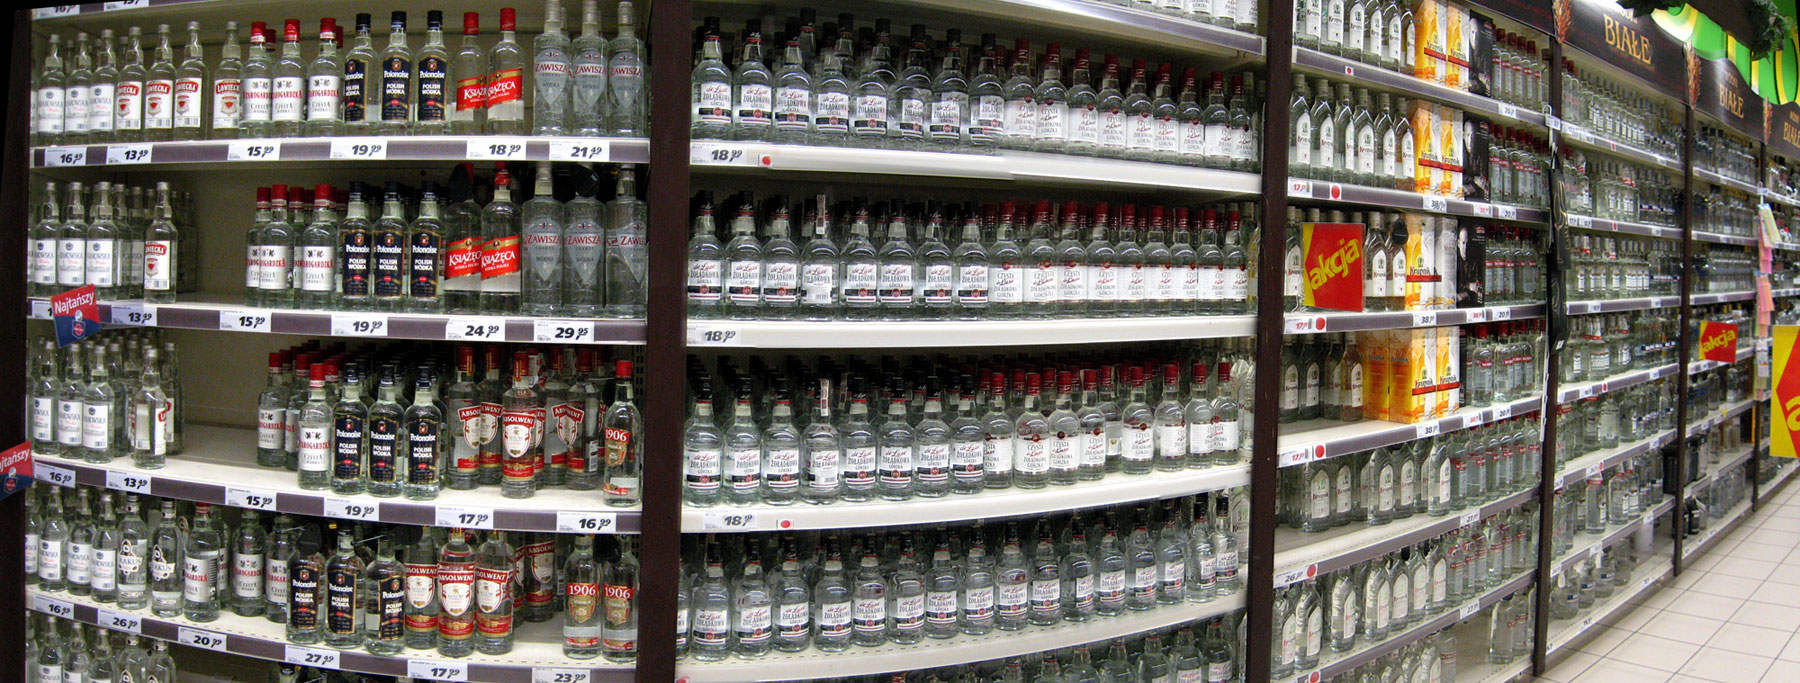 The great wall of vodka img1